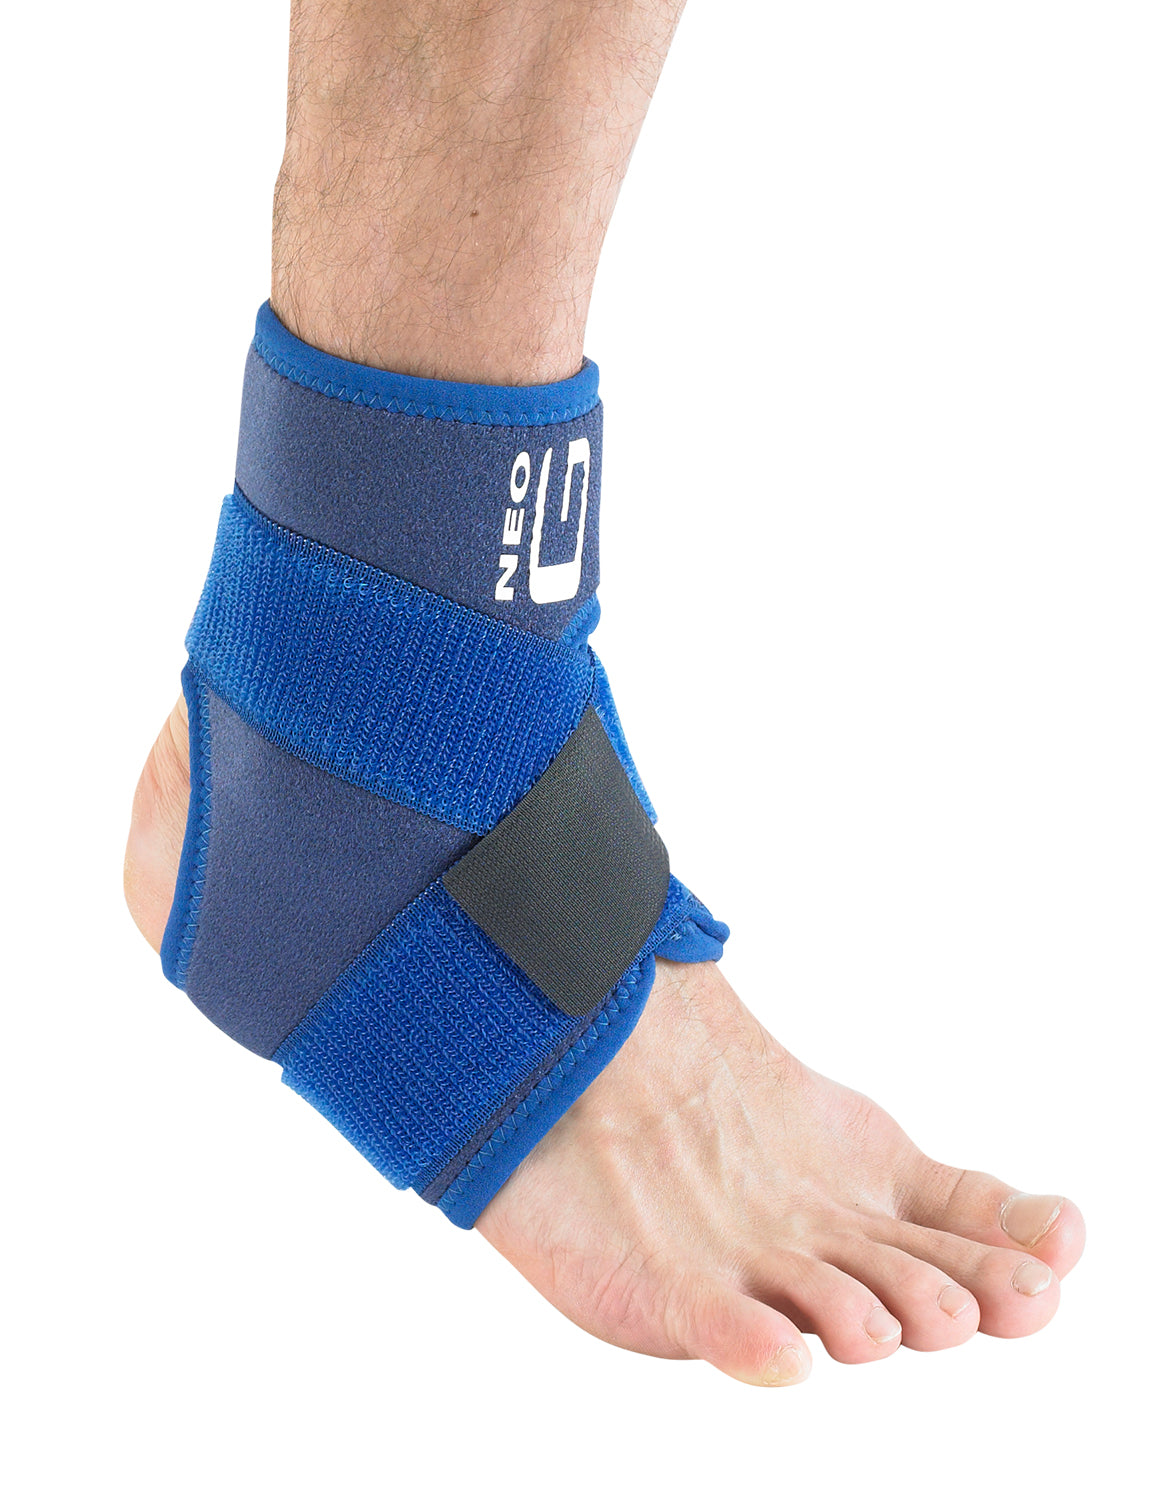 Neo G Ankle Support with Figure of 8 Strap – Neo G USA